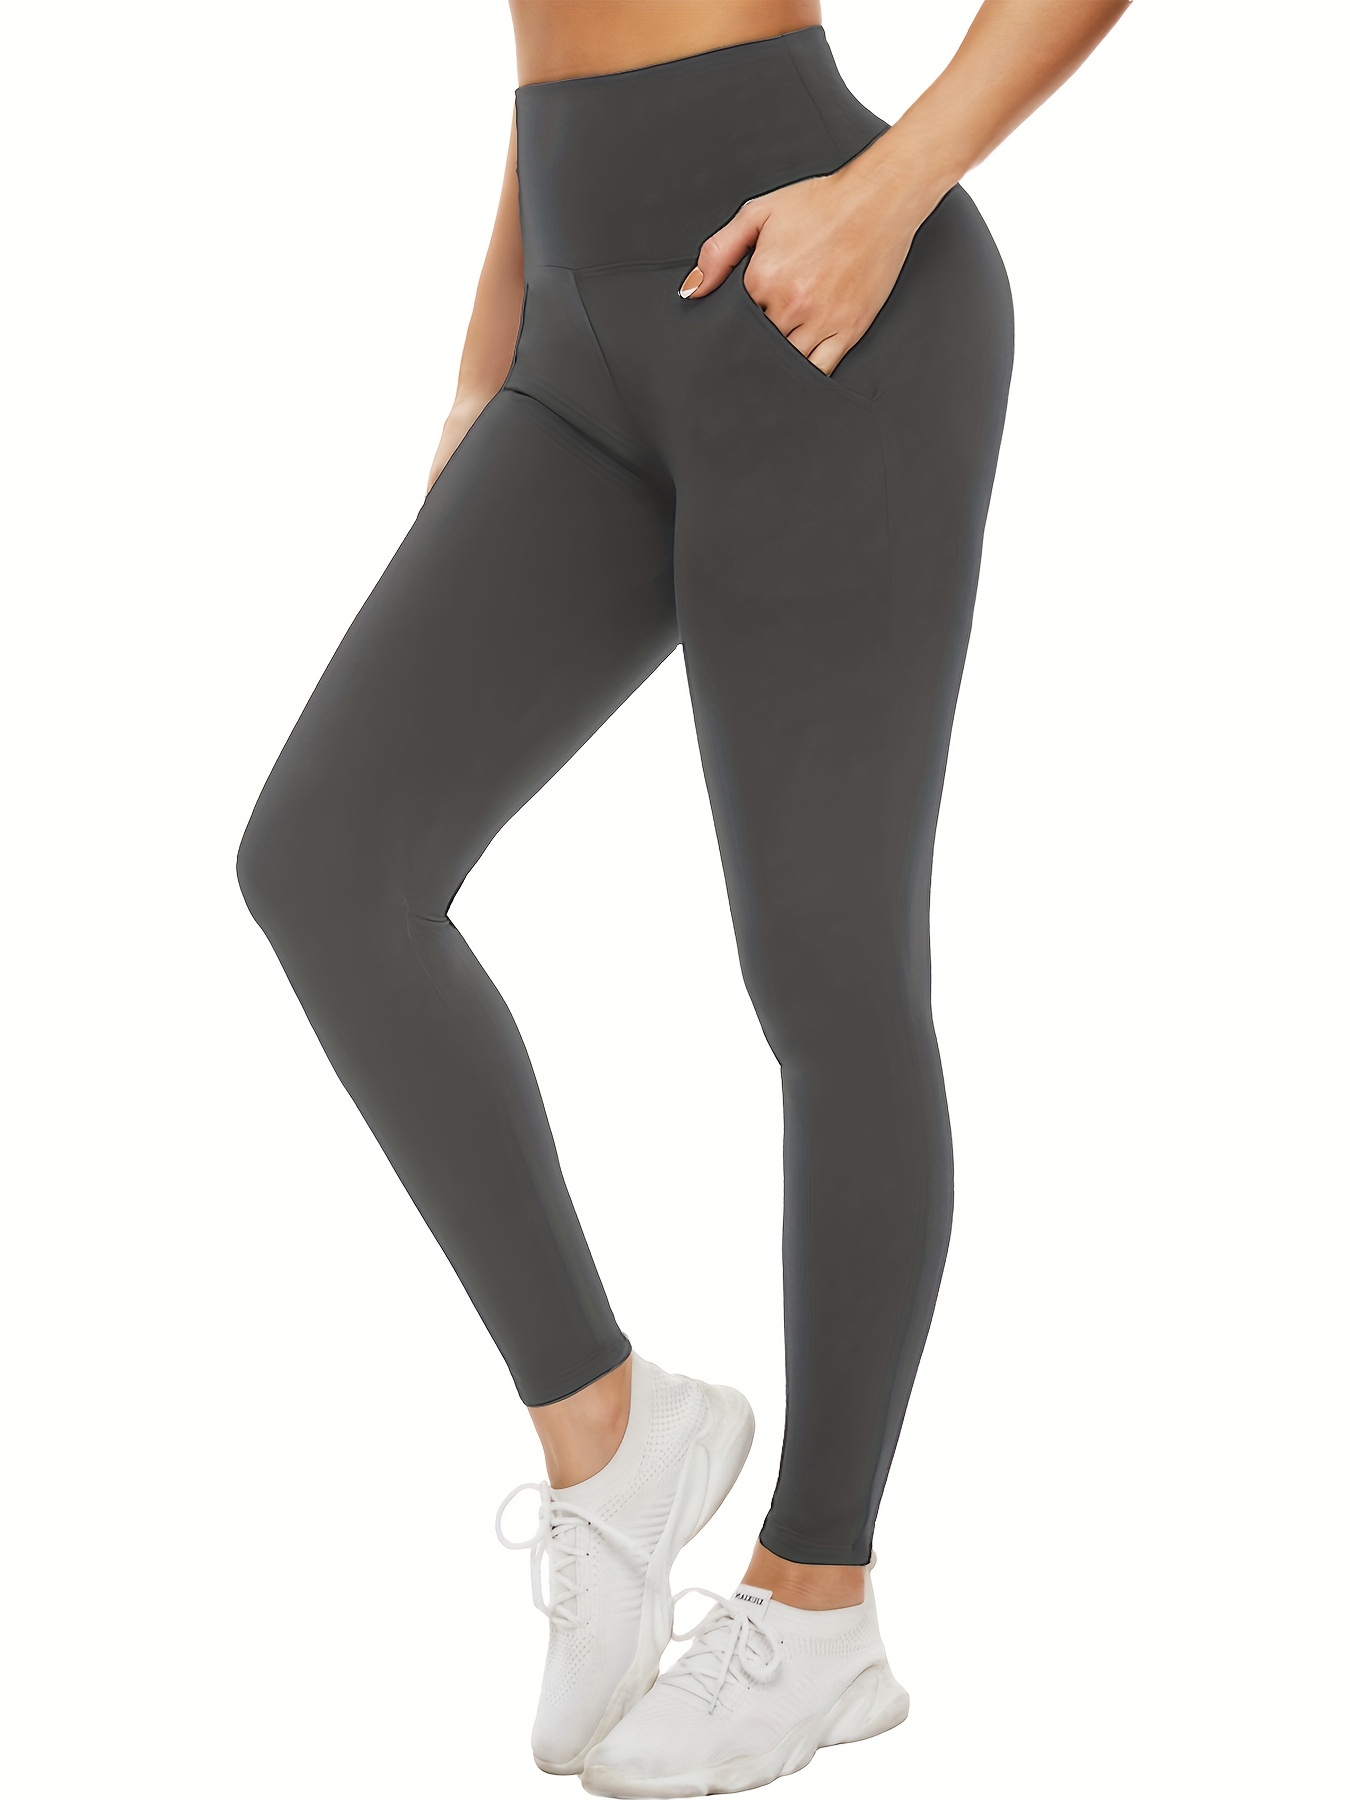 Yoga Pants For Women, High Waisted Leggings With Pockets, Tummy